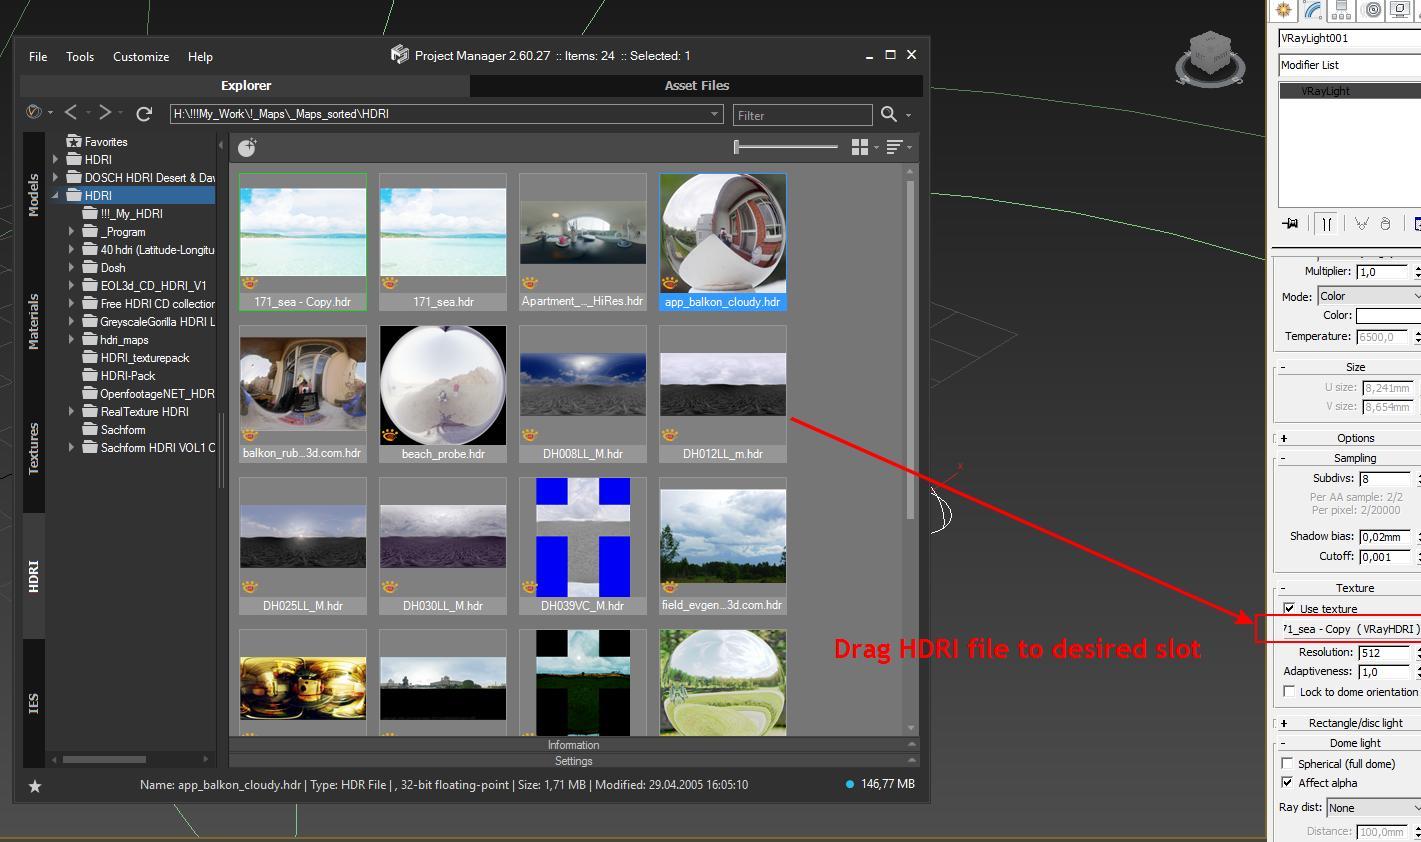 assign HDRI to desired slot of Vray Light by dragging